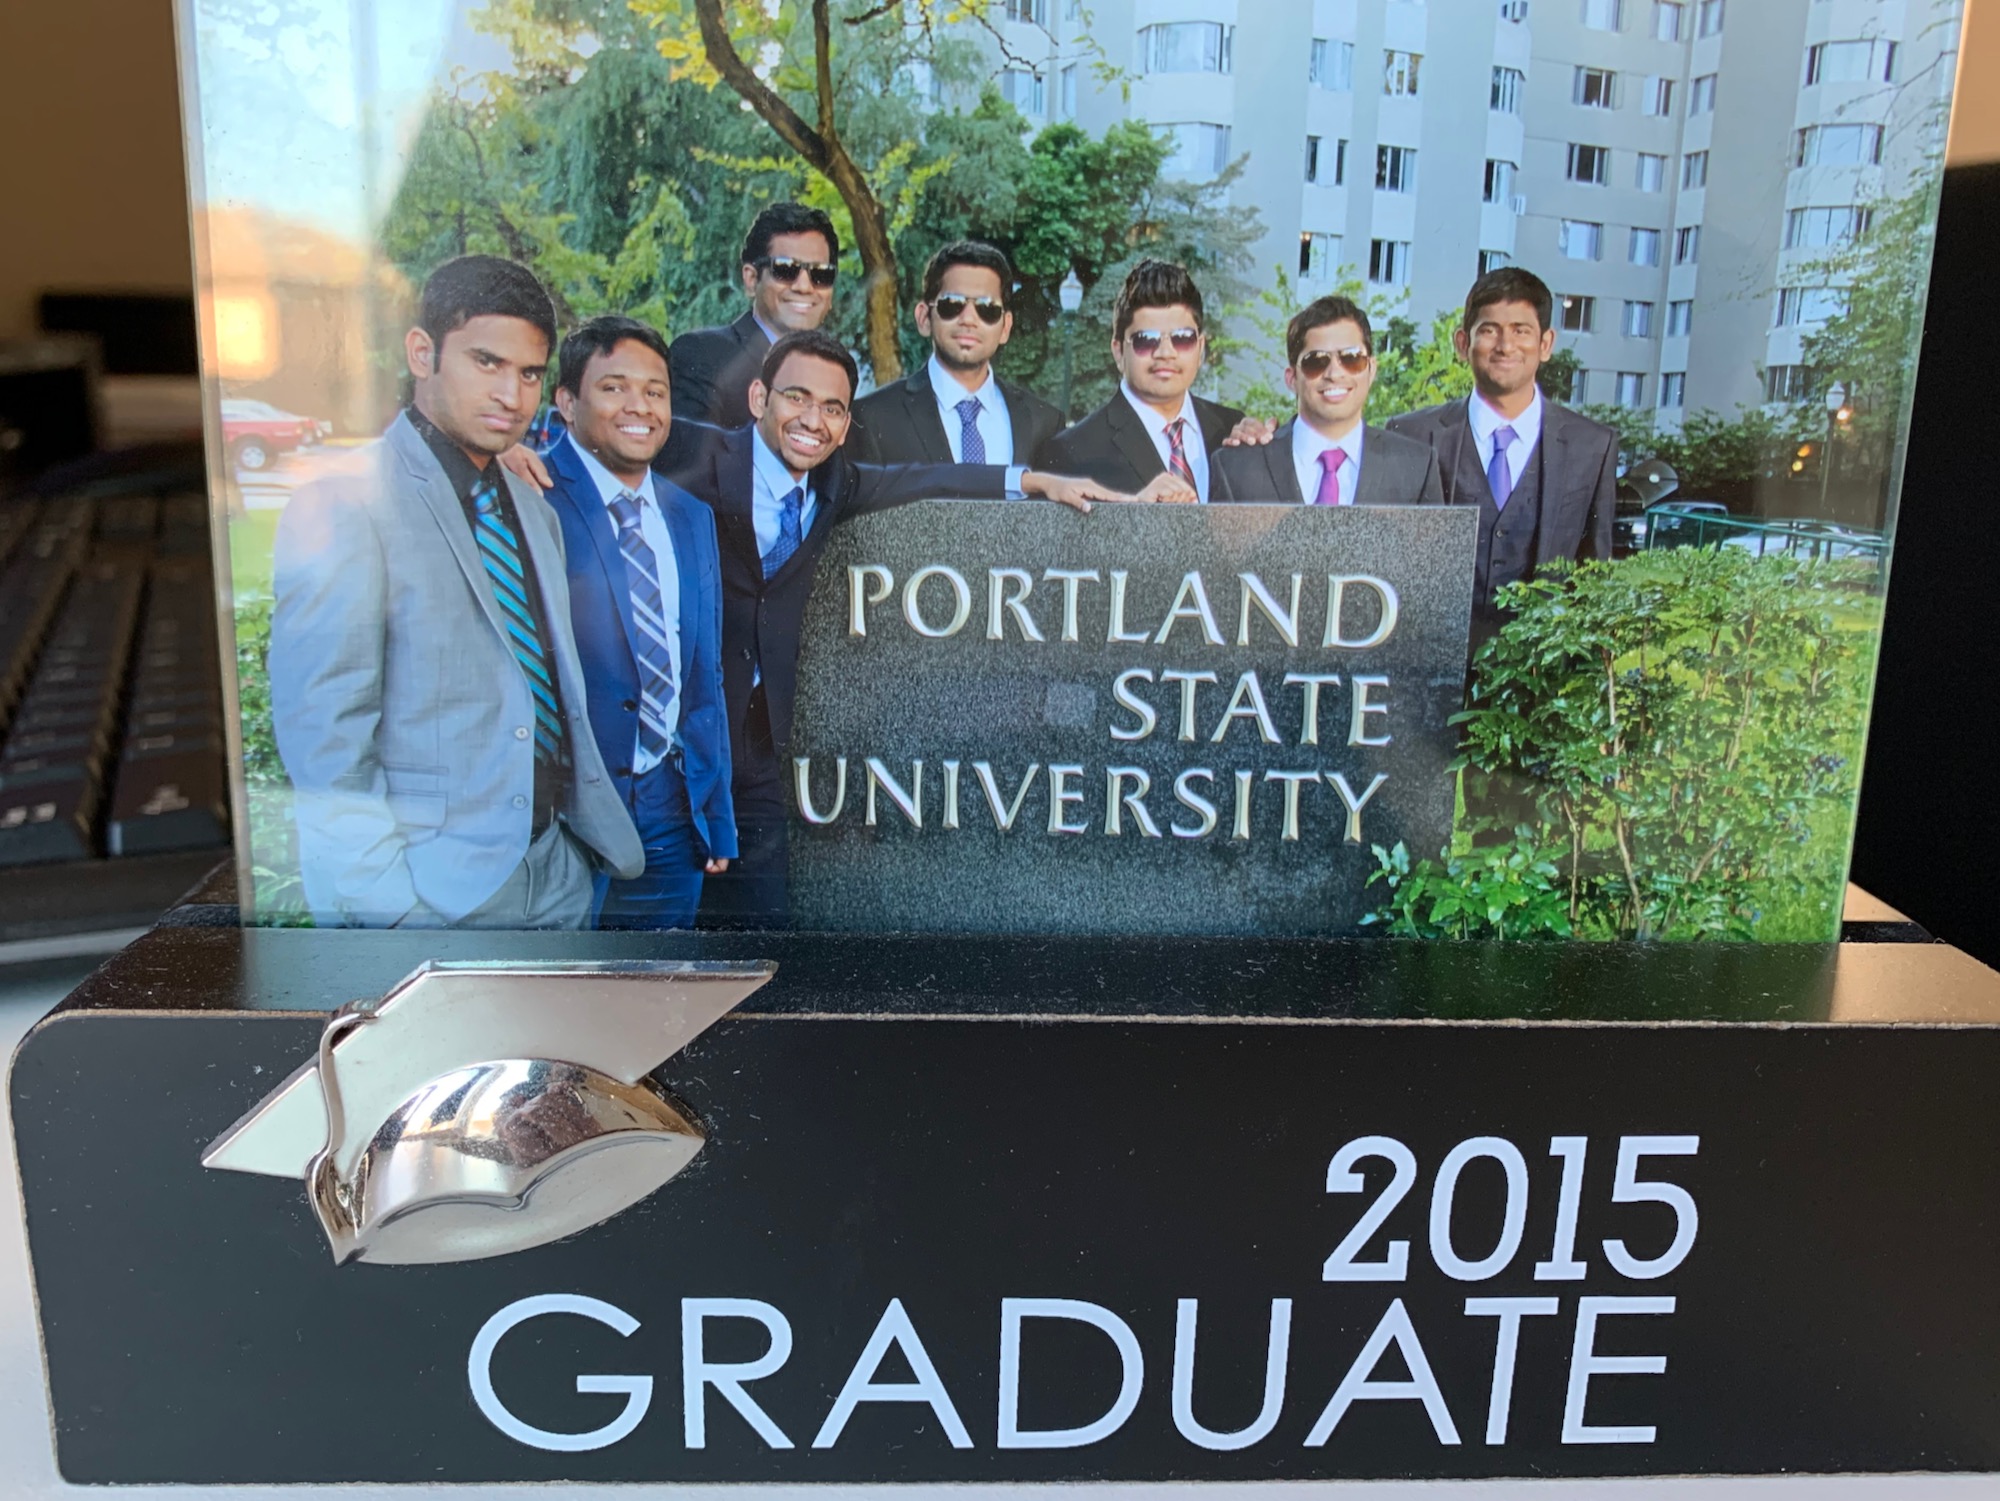 There is a photo frame with a picture of graduates.